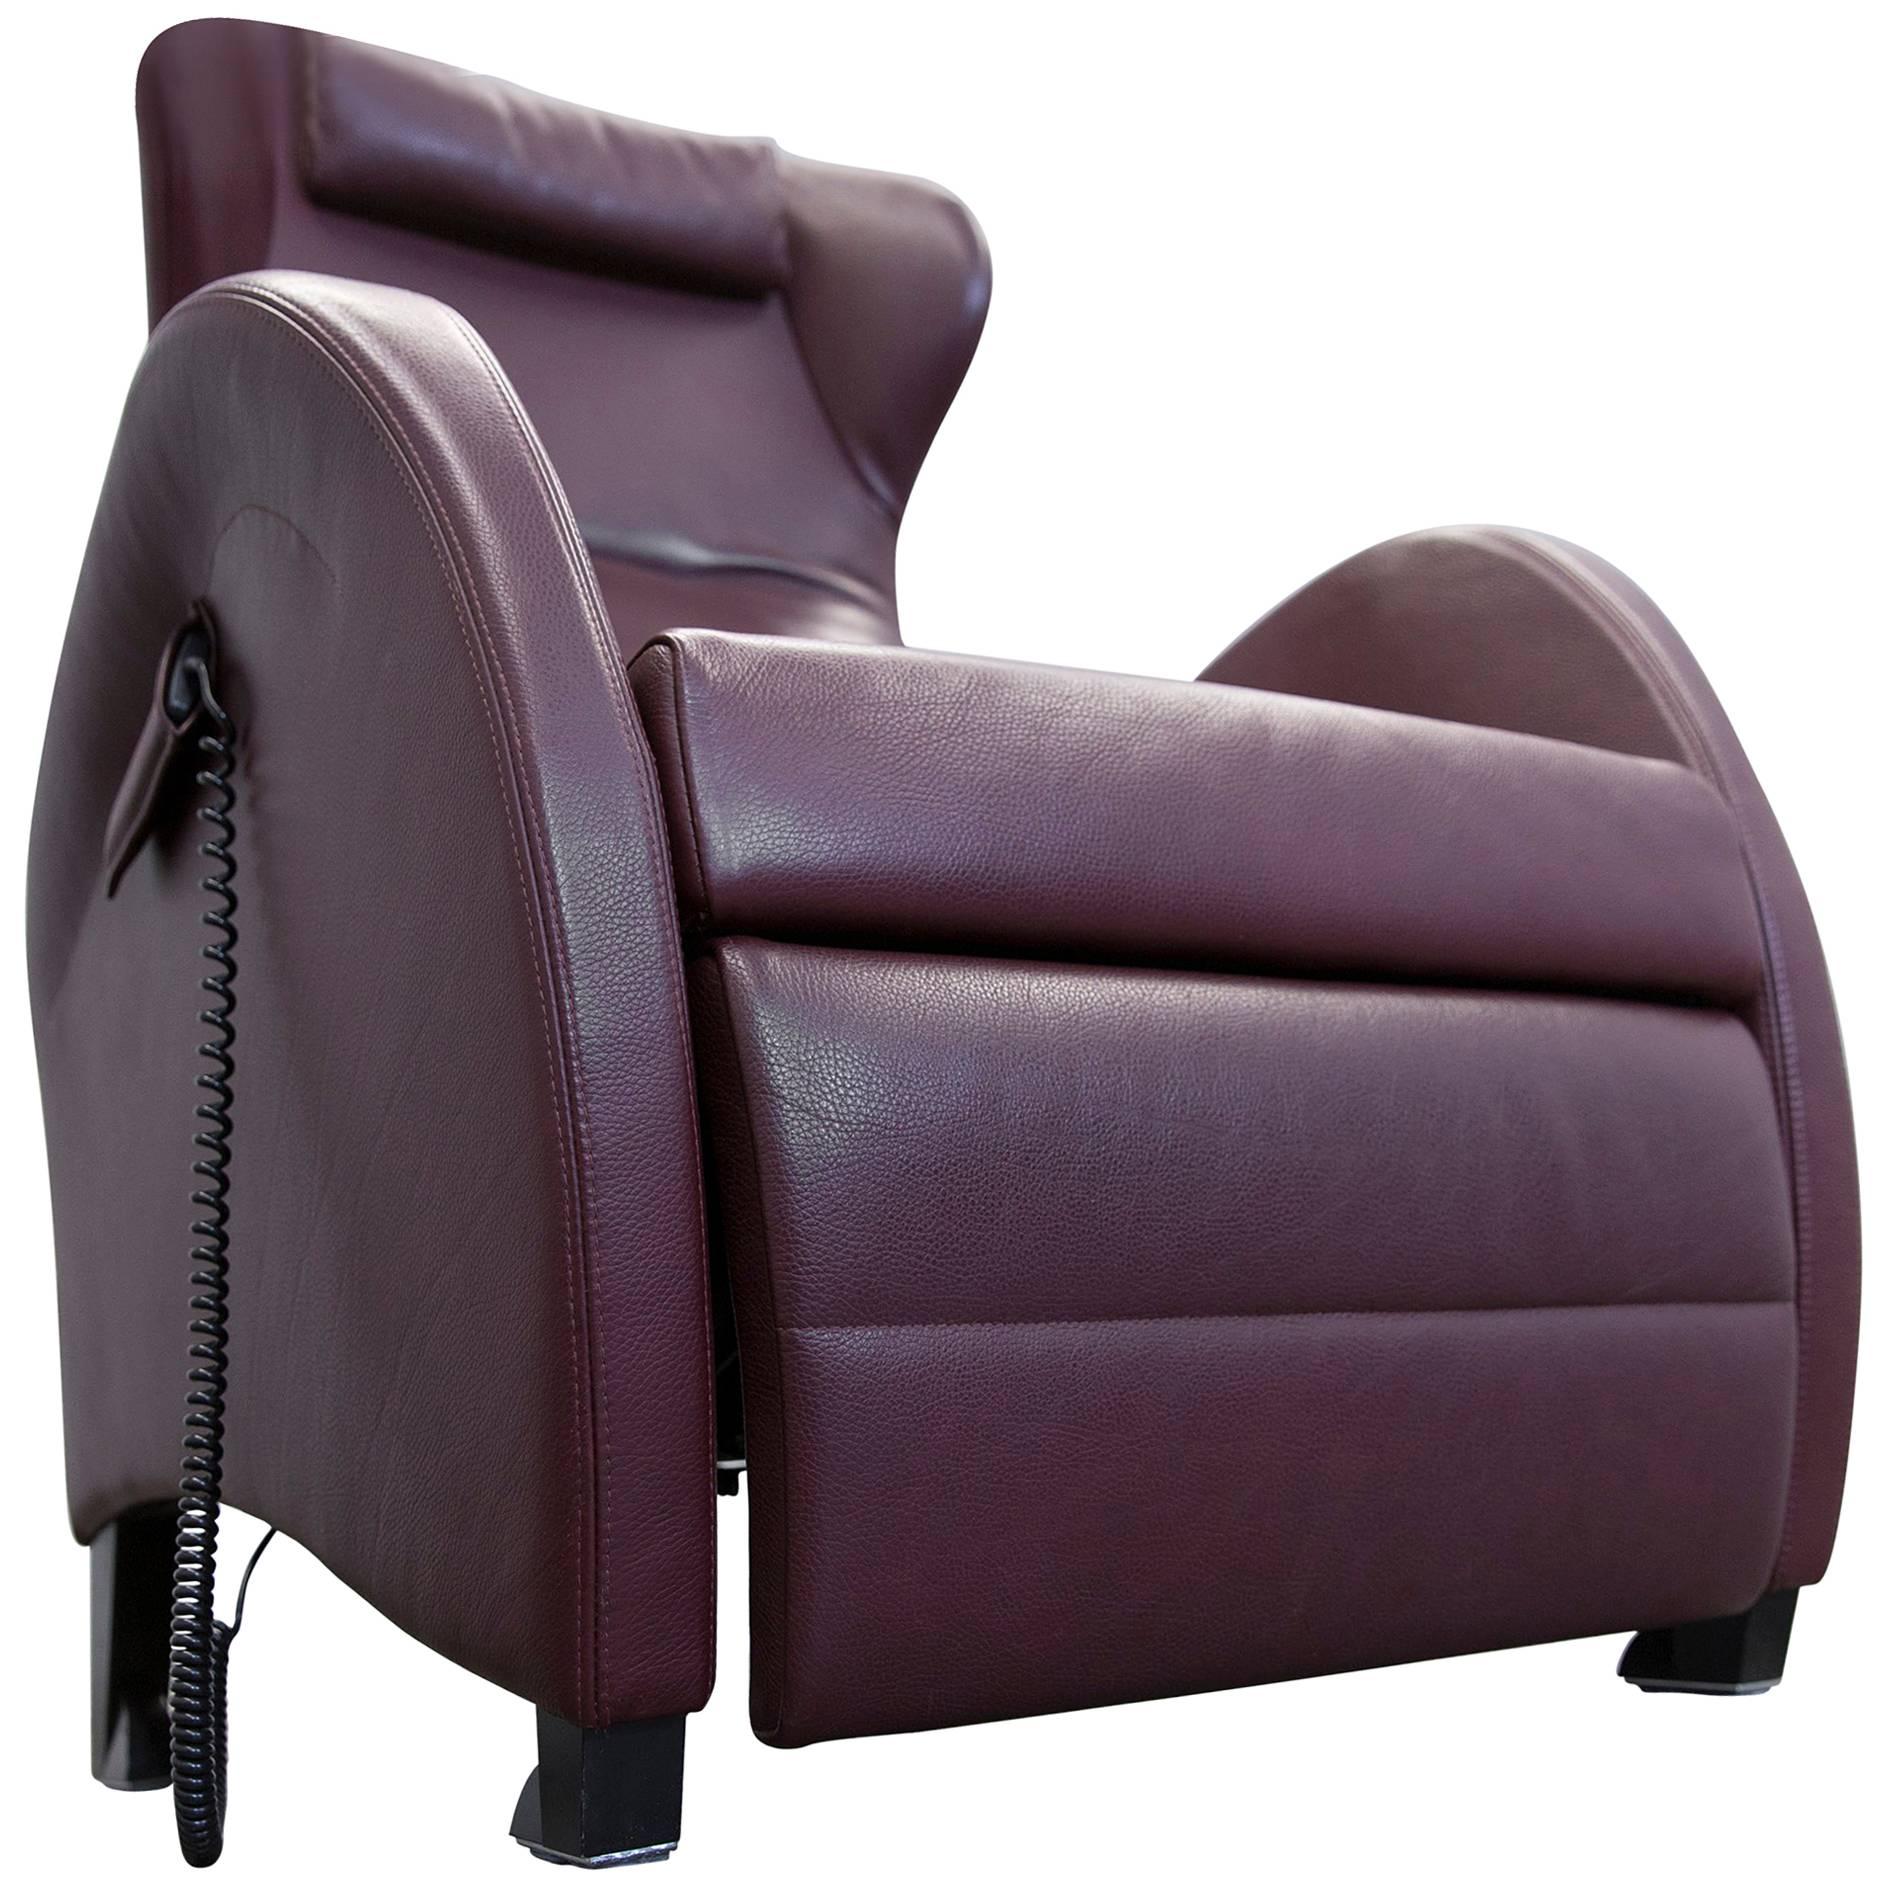 Wittmann Leather Chair Wine Red One Seat Relax